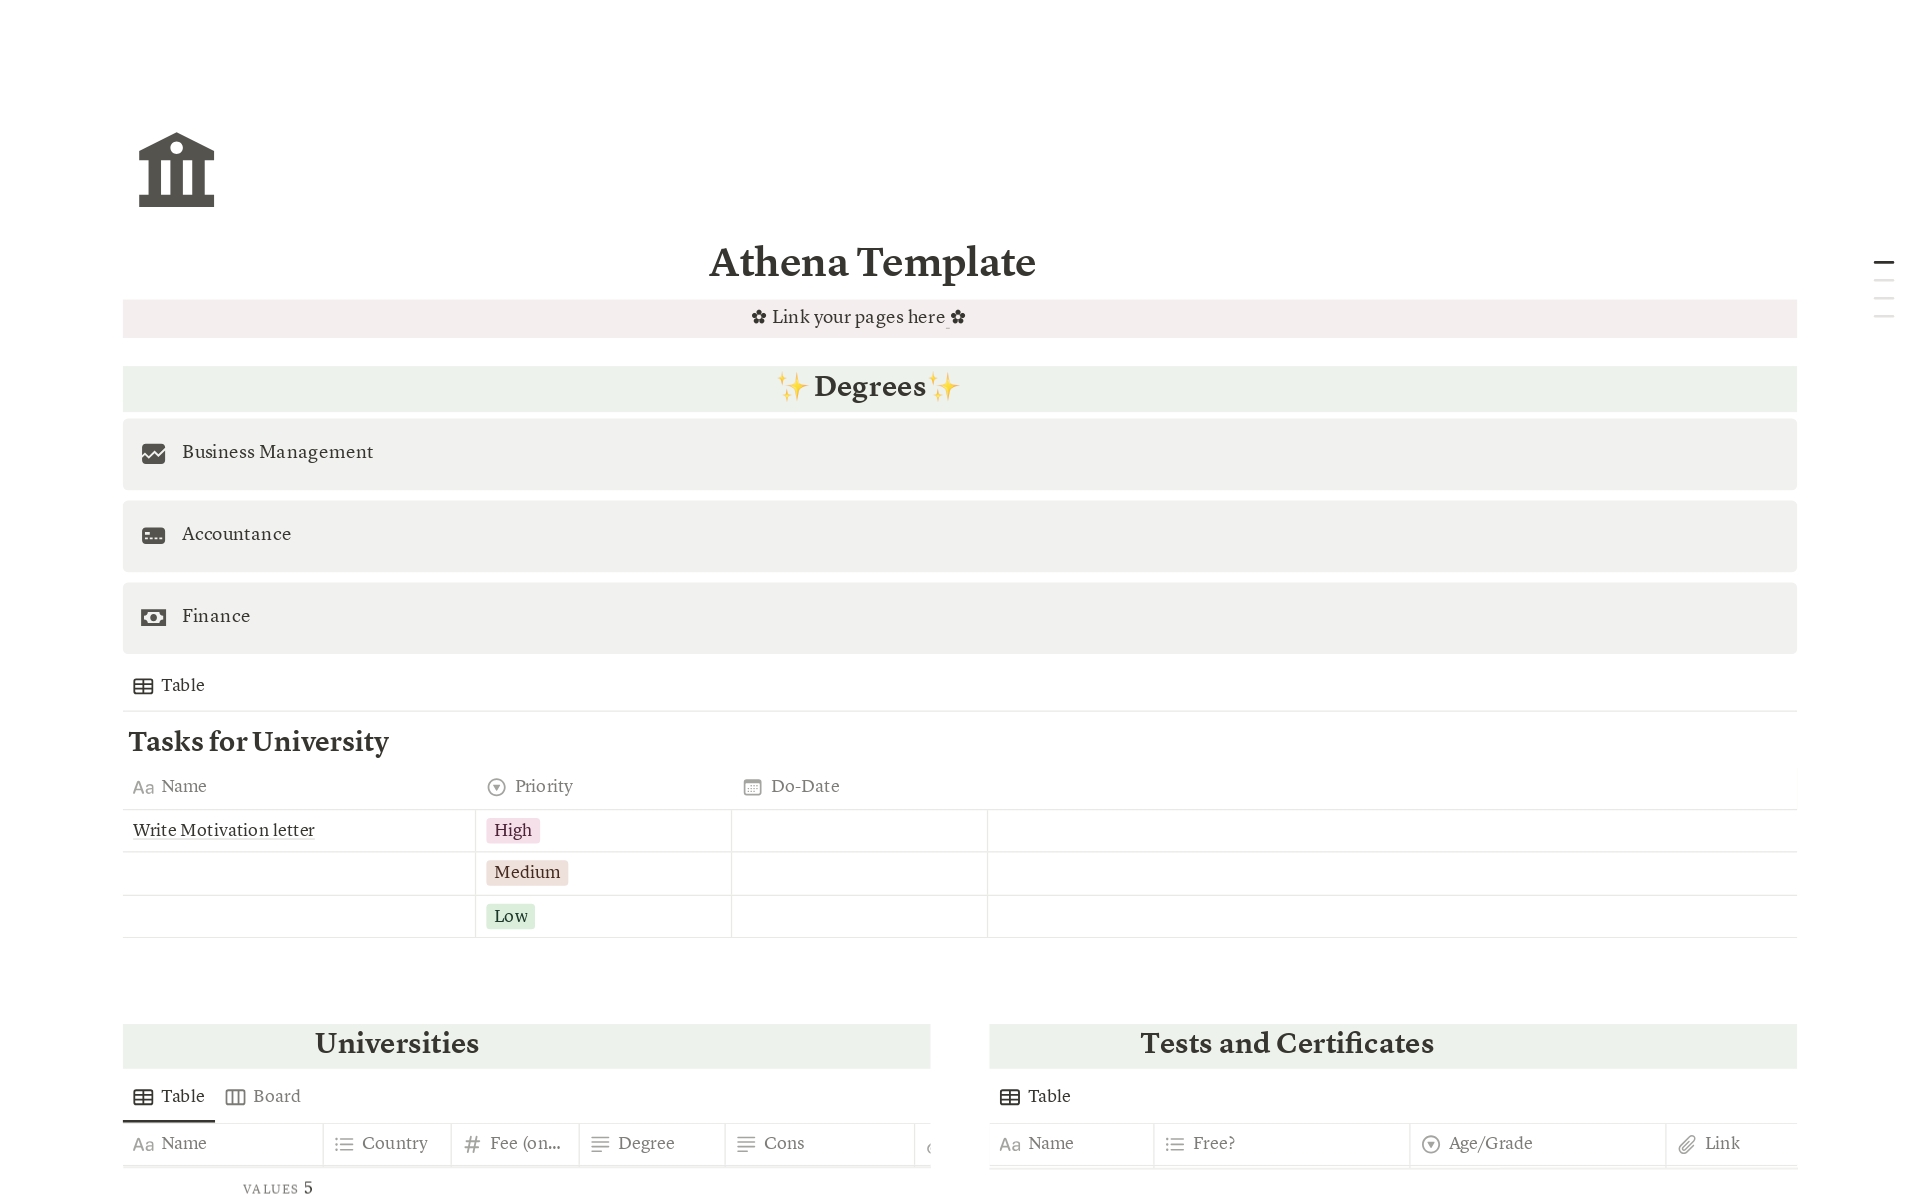 A template preview for Athena's University Application